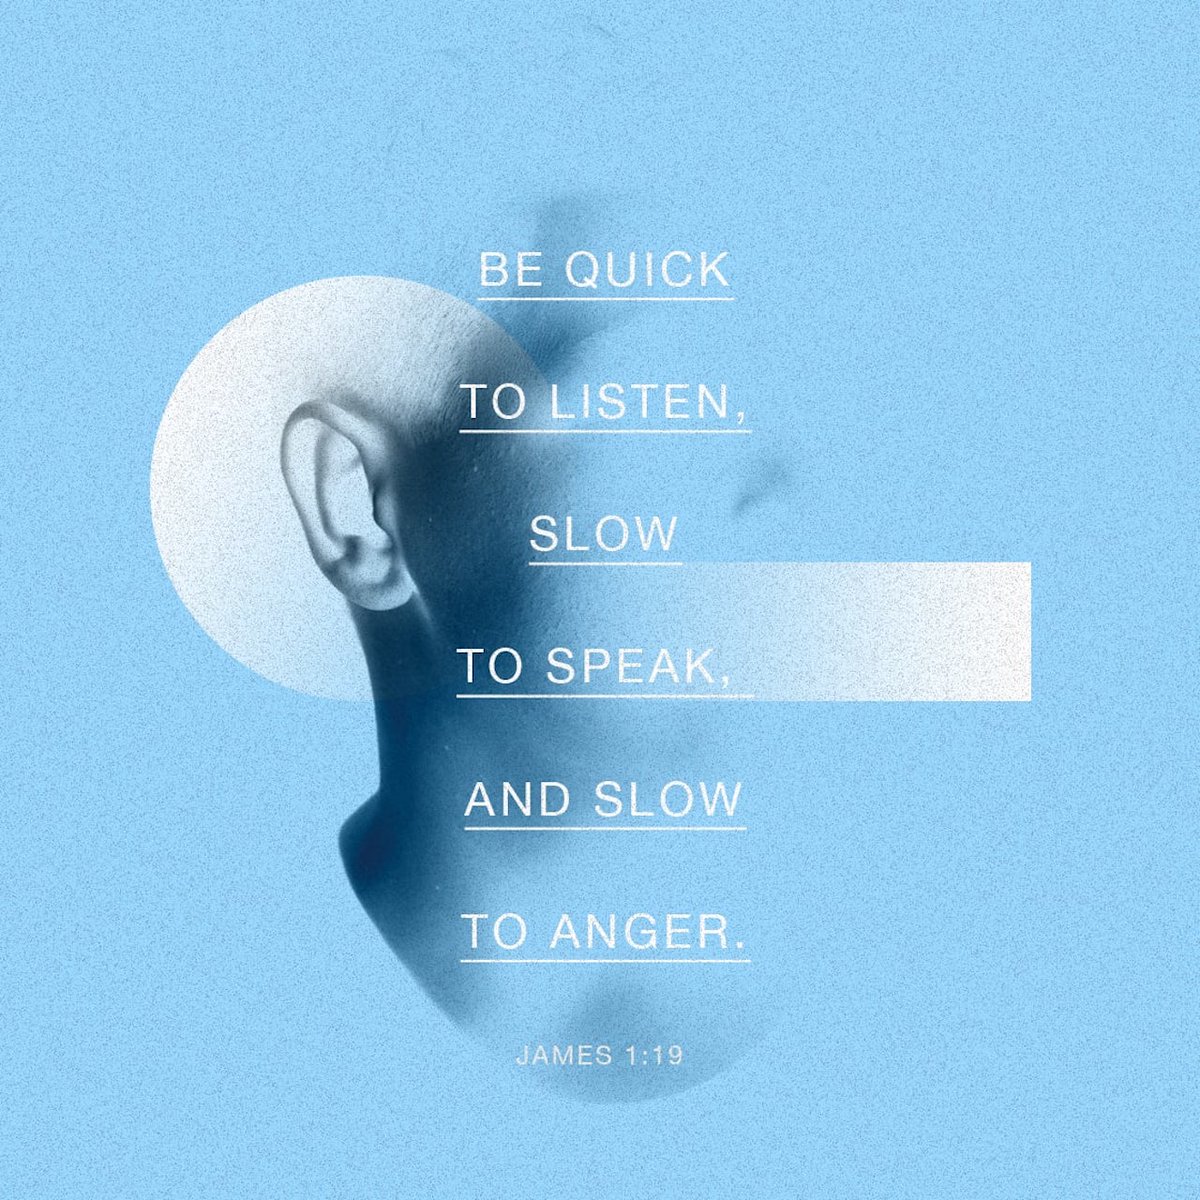 Wherefore, my beloved brethren, let every man be swift to hear, slow to speak, slow to wrath:
James 1:19 KJV

I decree your tongue will not work against you, in Jesus Mighty Name #ShieldedByFire #Amen